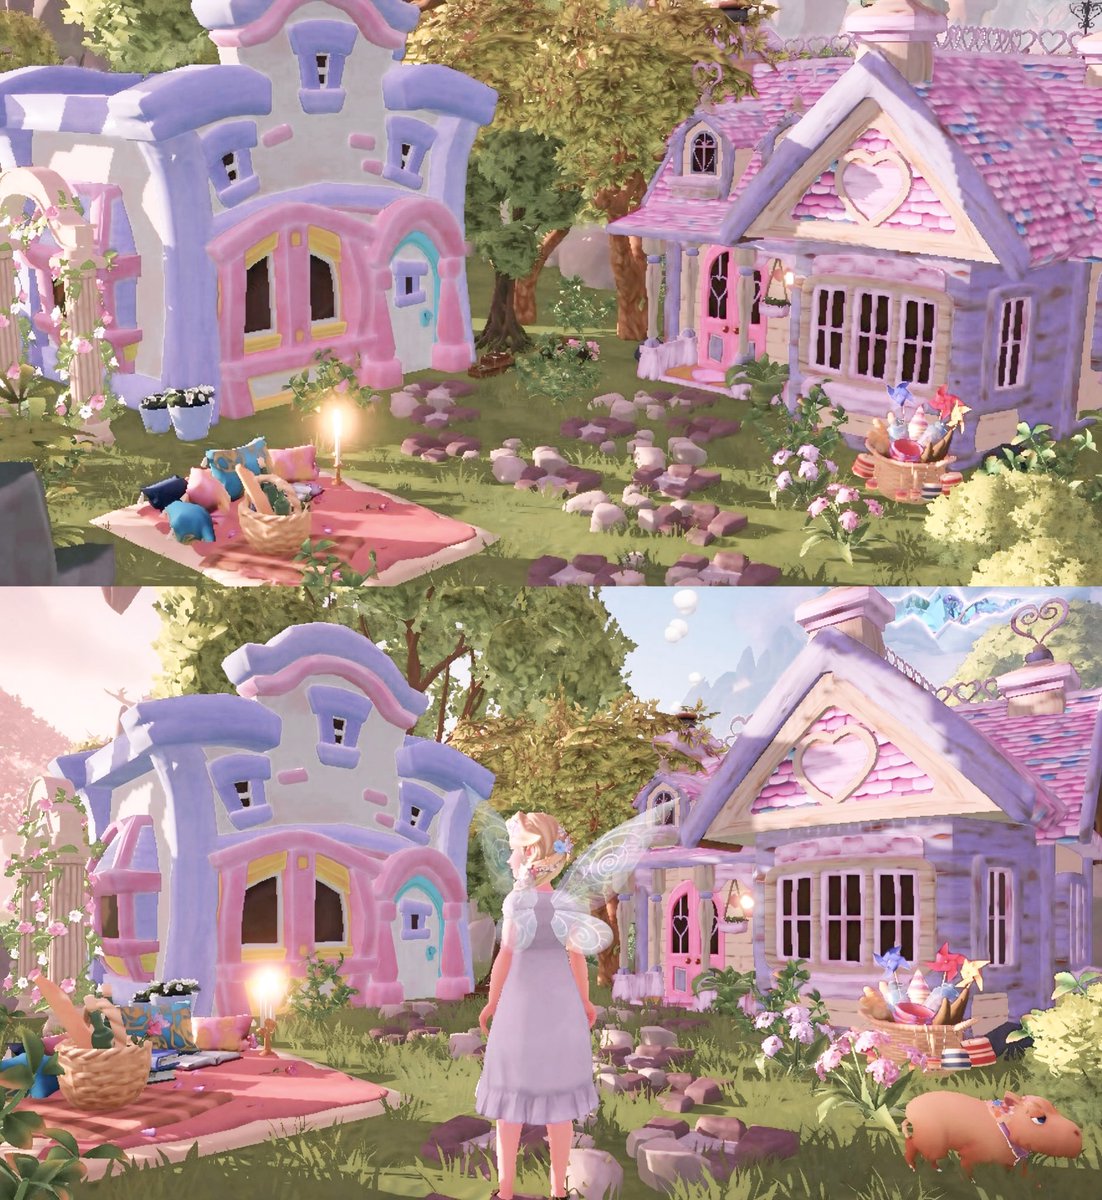 Daisy and Minnie’s houses are just the cutest together!! 🥹🌸 #ddlv